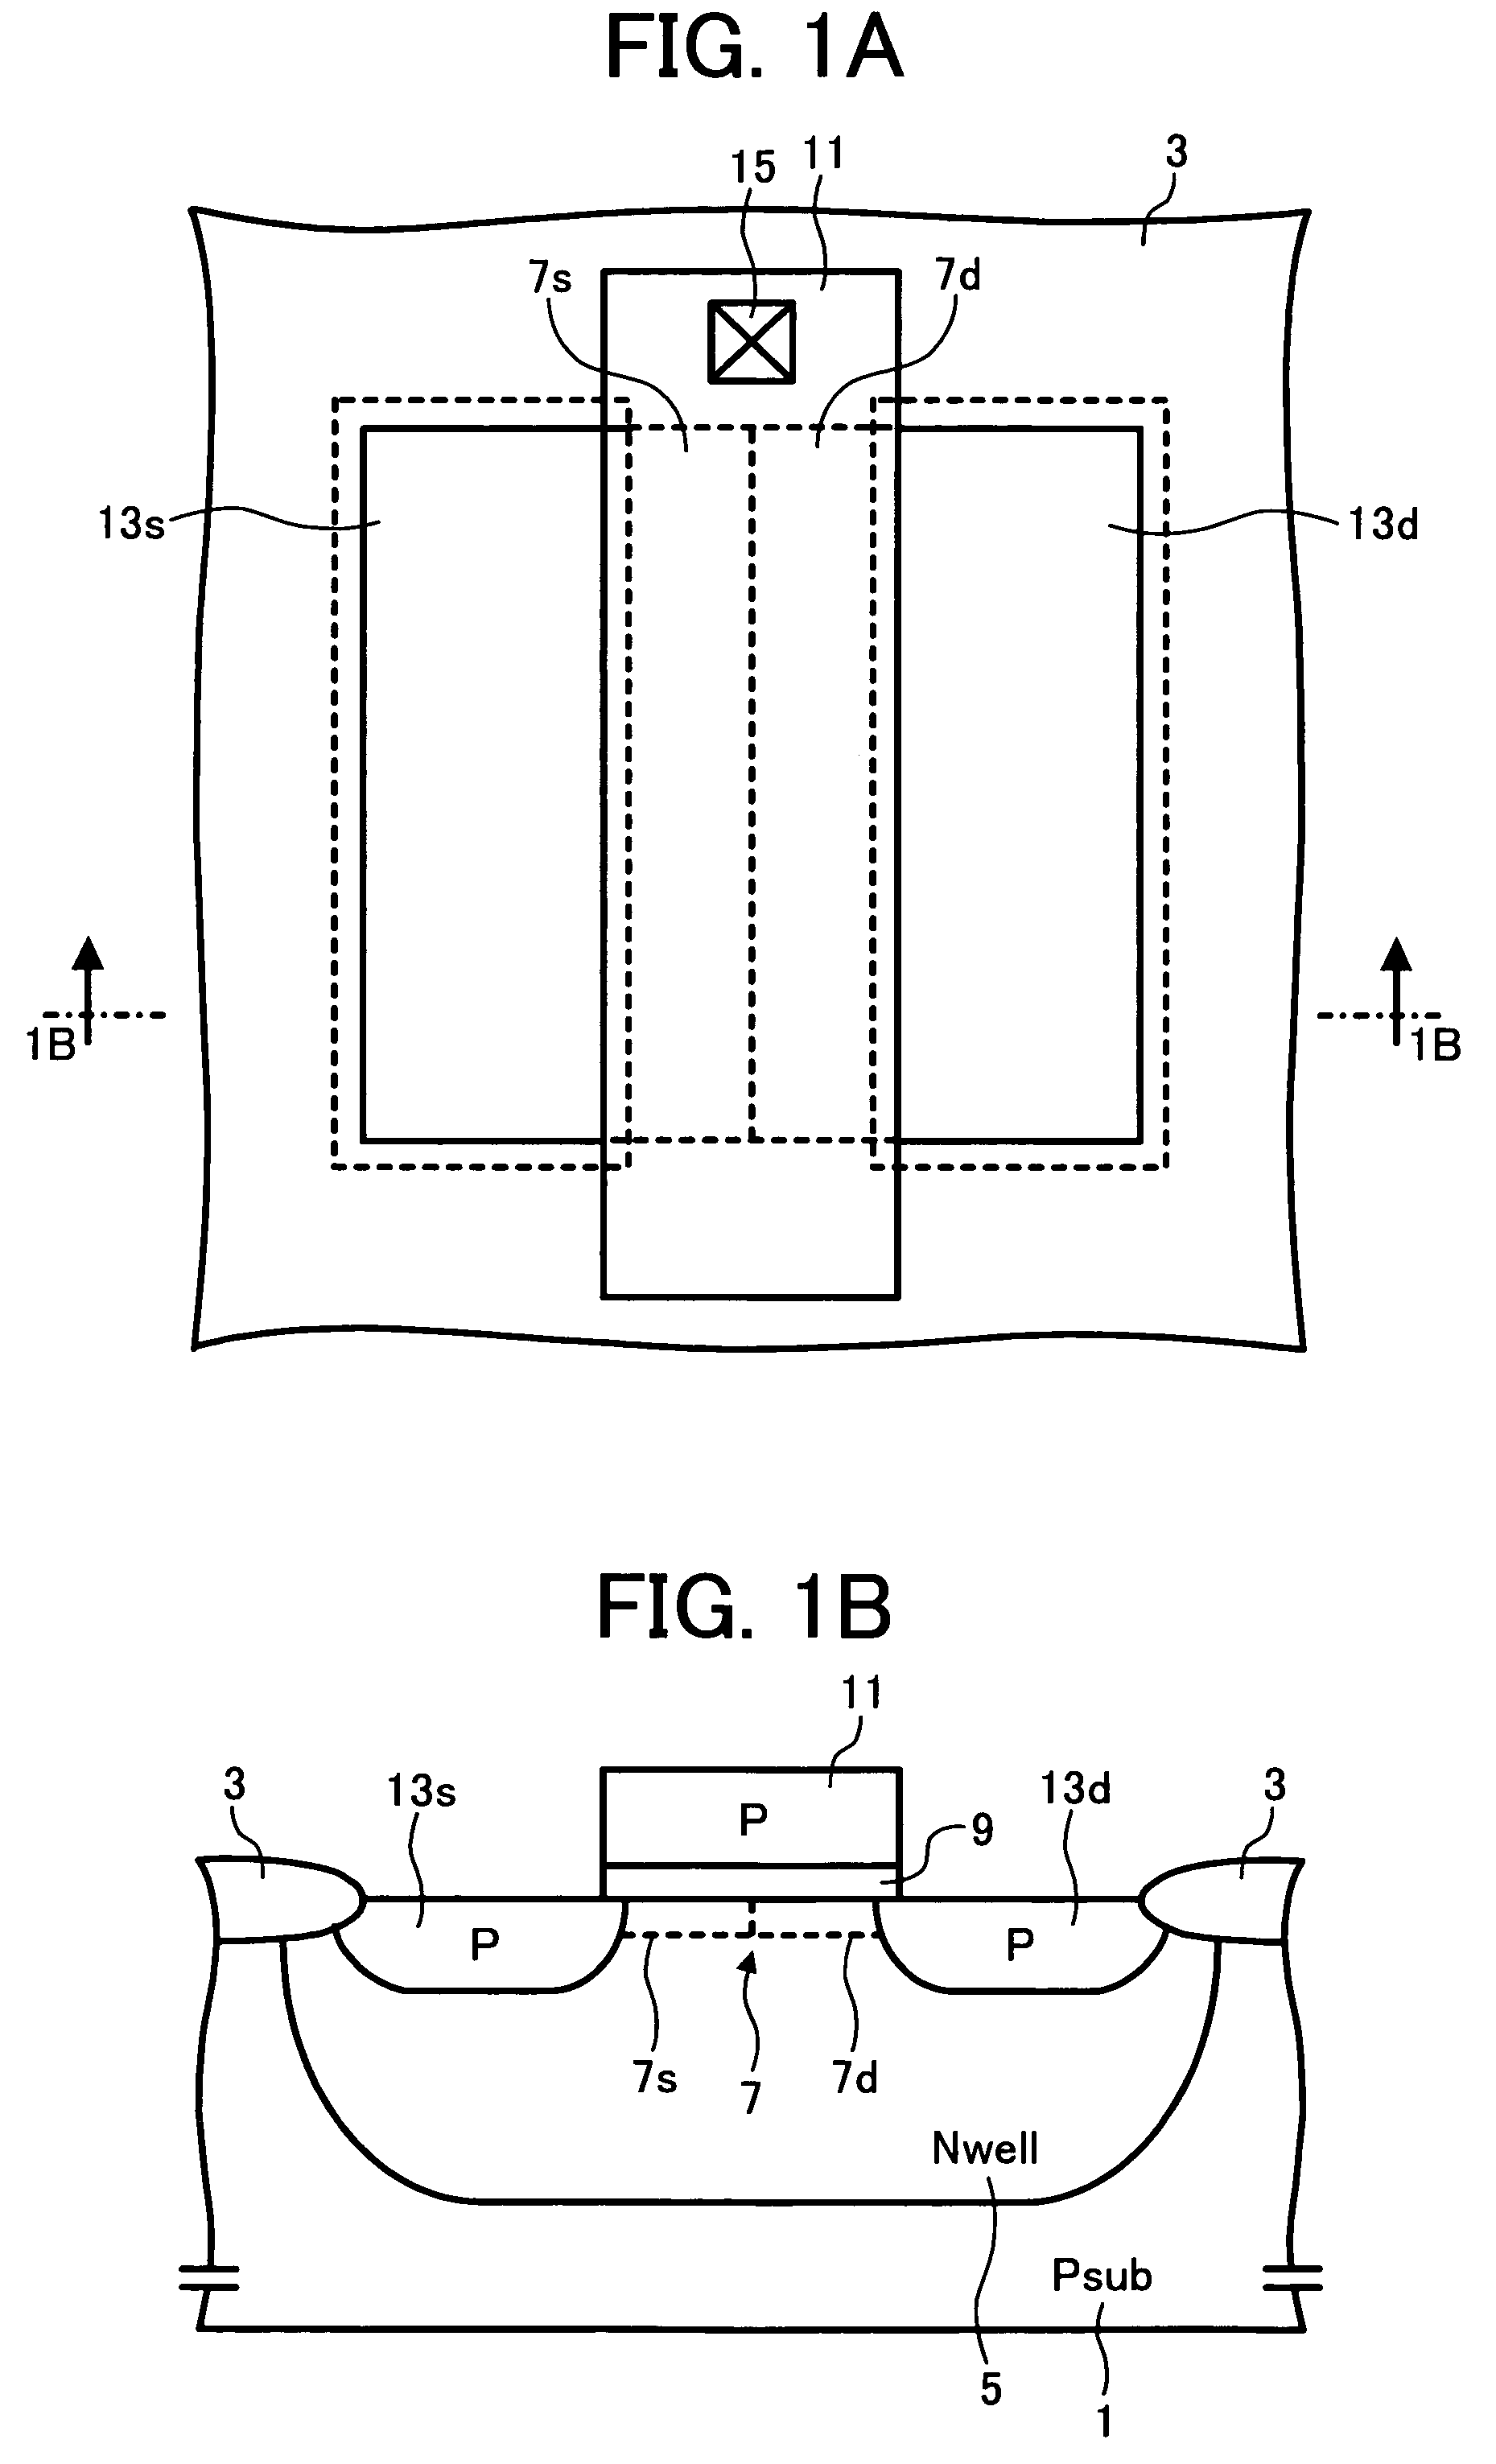 Metal oxide silicon transistor and semiconductor apparatus having high lambda and beta performances